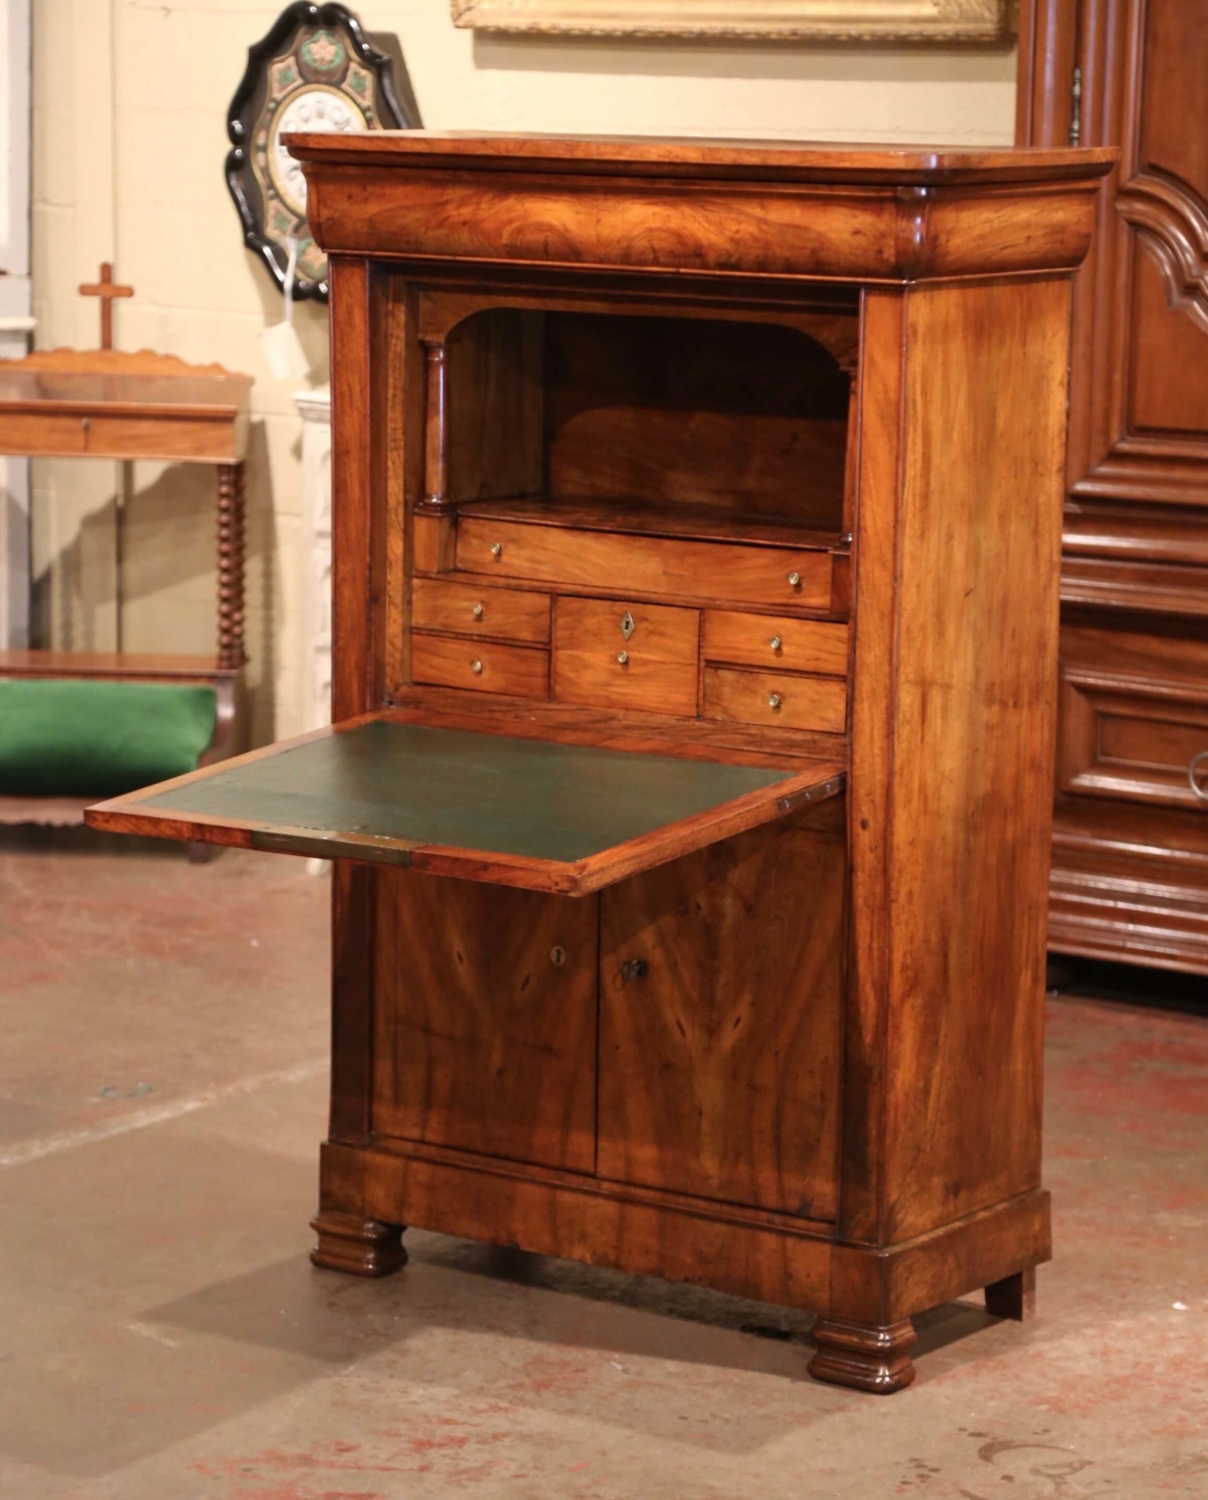 Period: Louis-Philippe (1830-1848) Wooden secretary with…